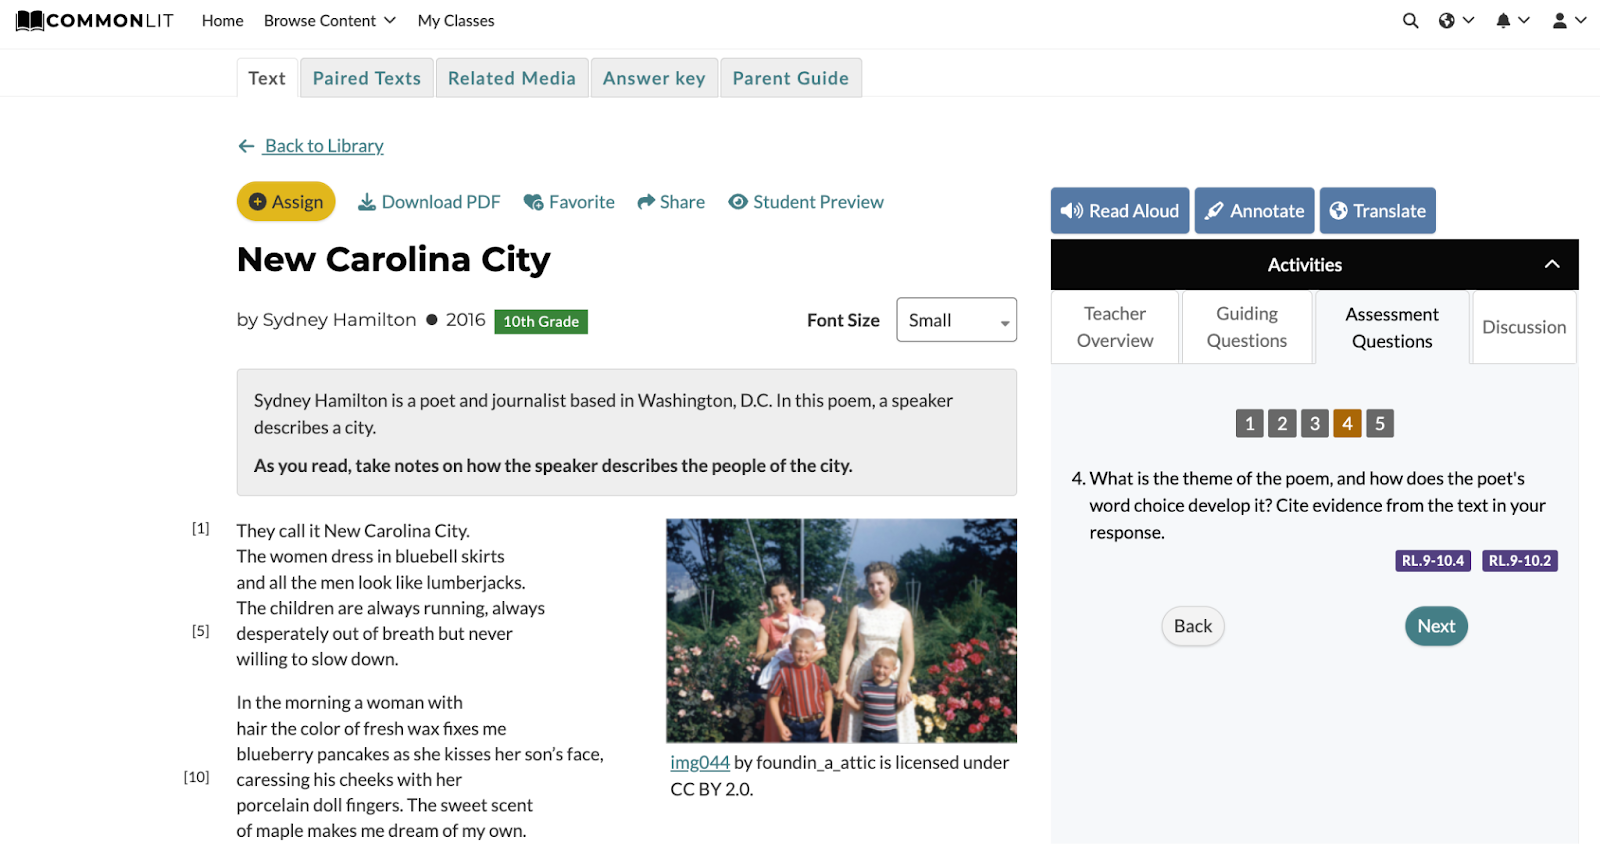 A screenshot of a poem from the CommonLit website and a scaffolded assessment question about the poem. The poem is called “New Carolina City” and it is about  community.